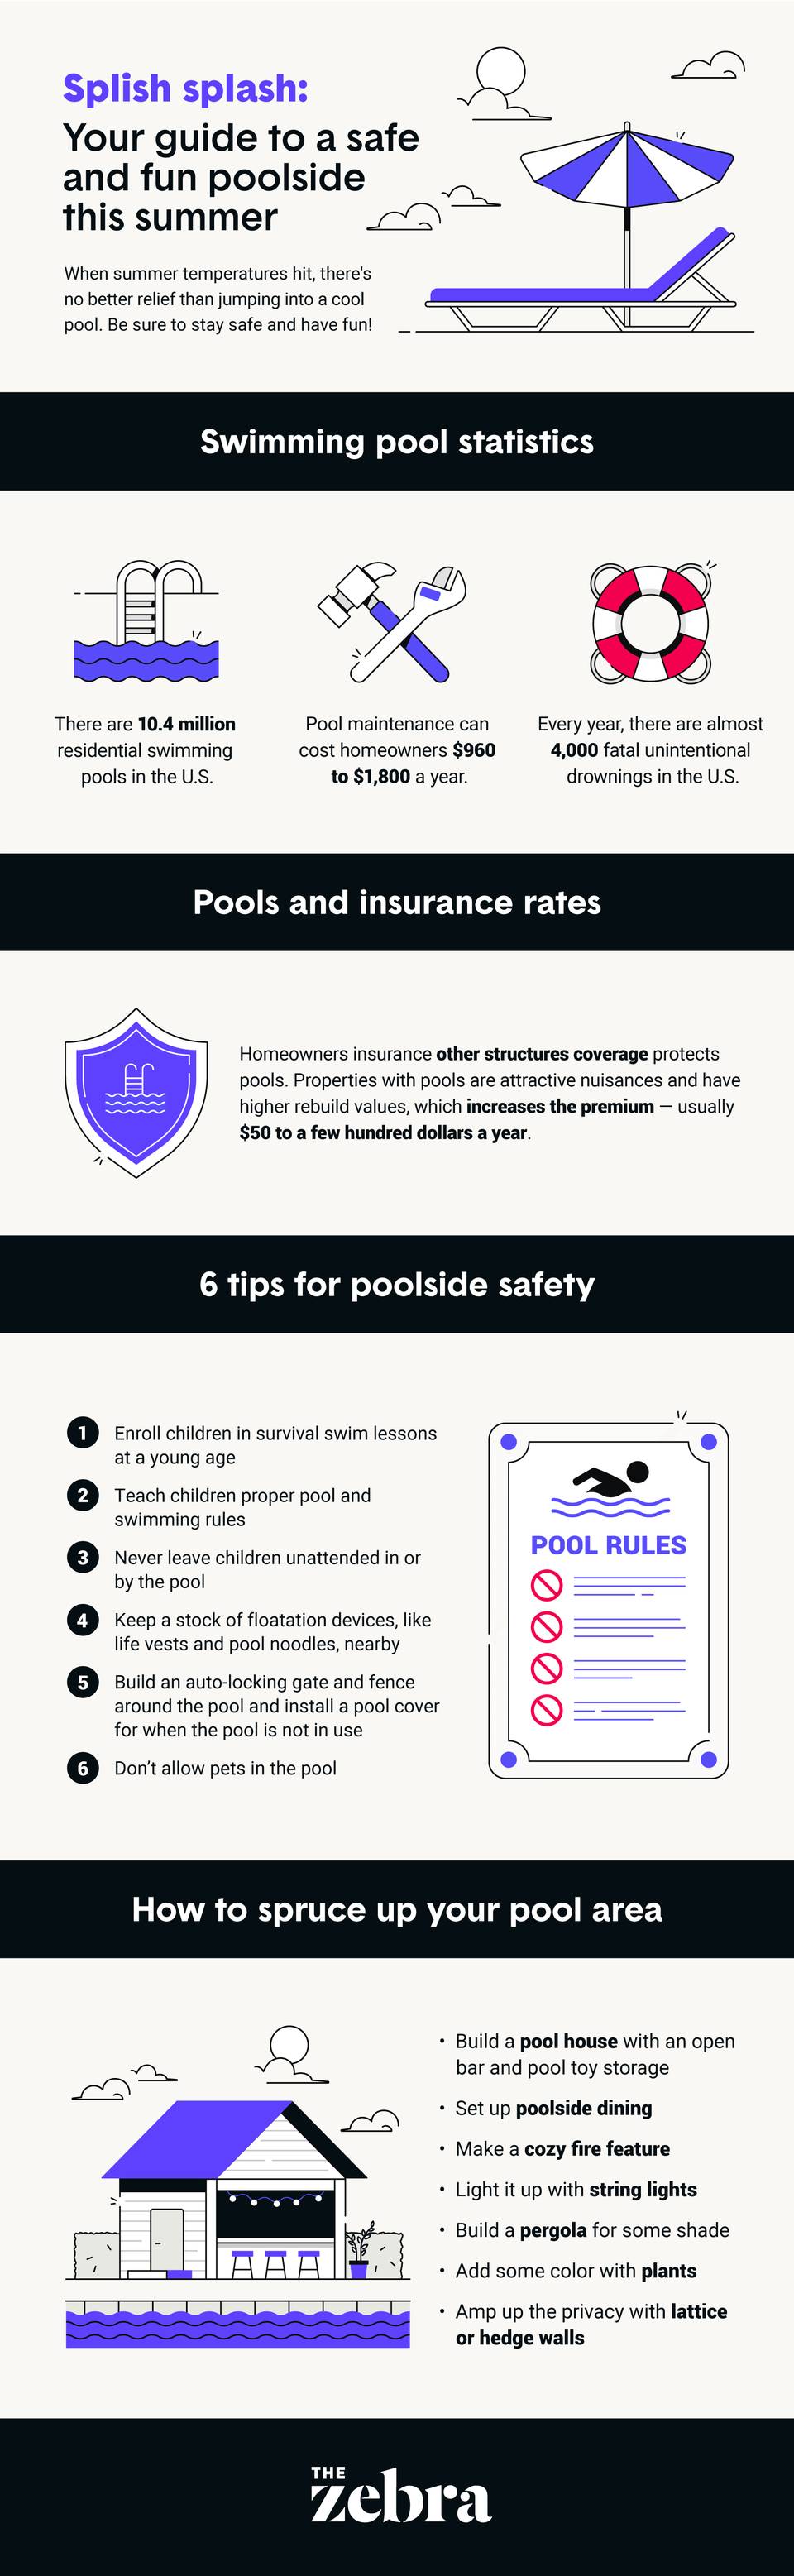 Splish Splash: Your Guide to a Safe and Fun Poolside This Summer